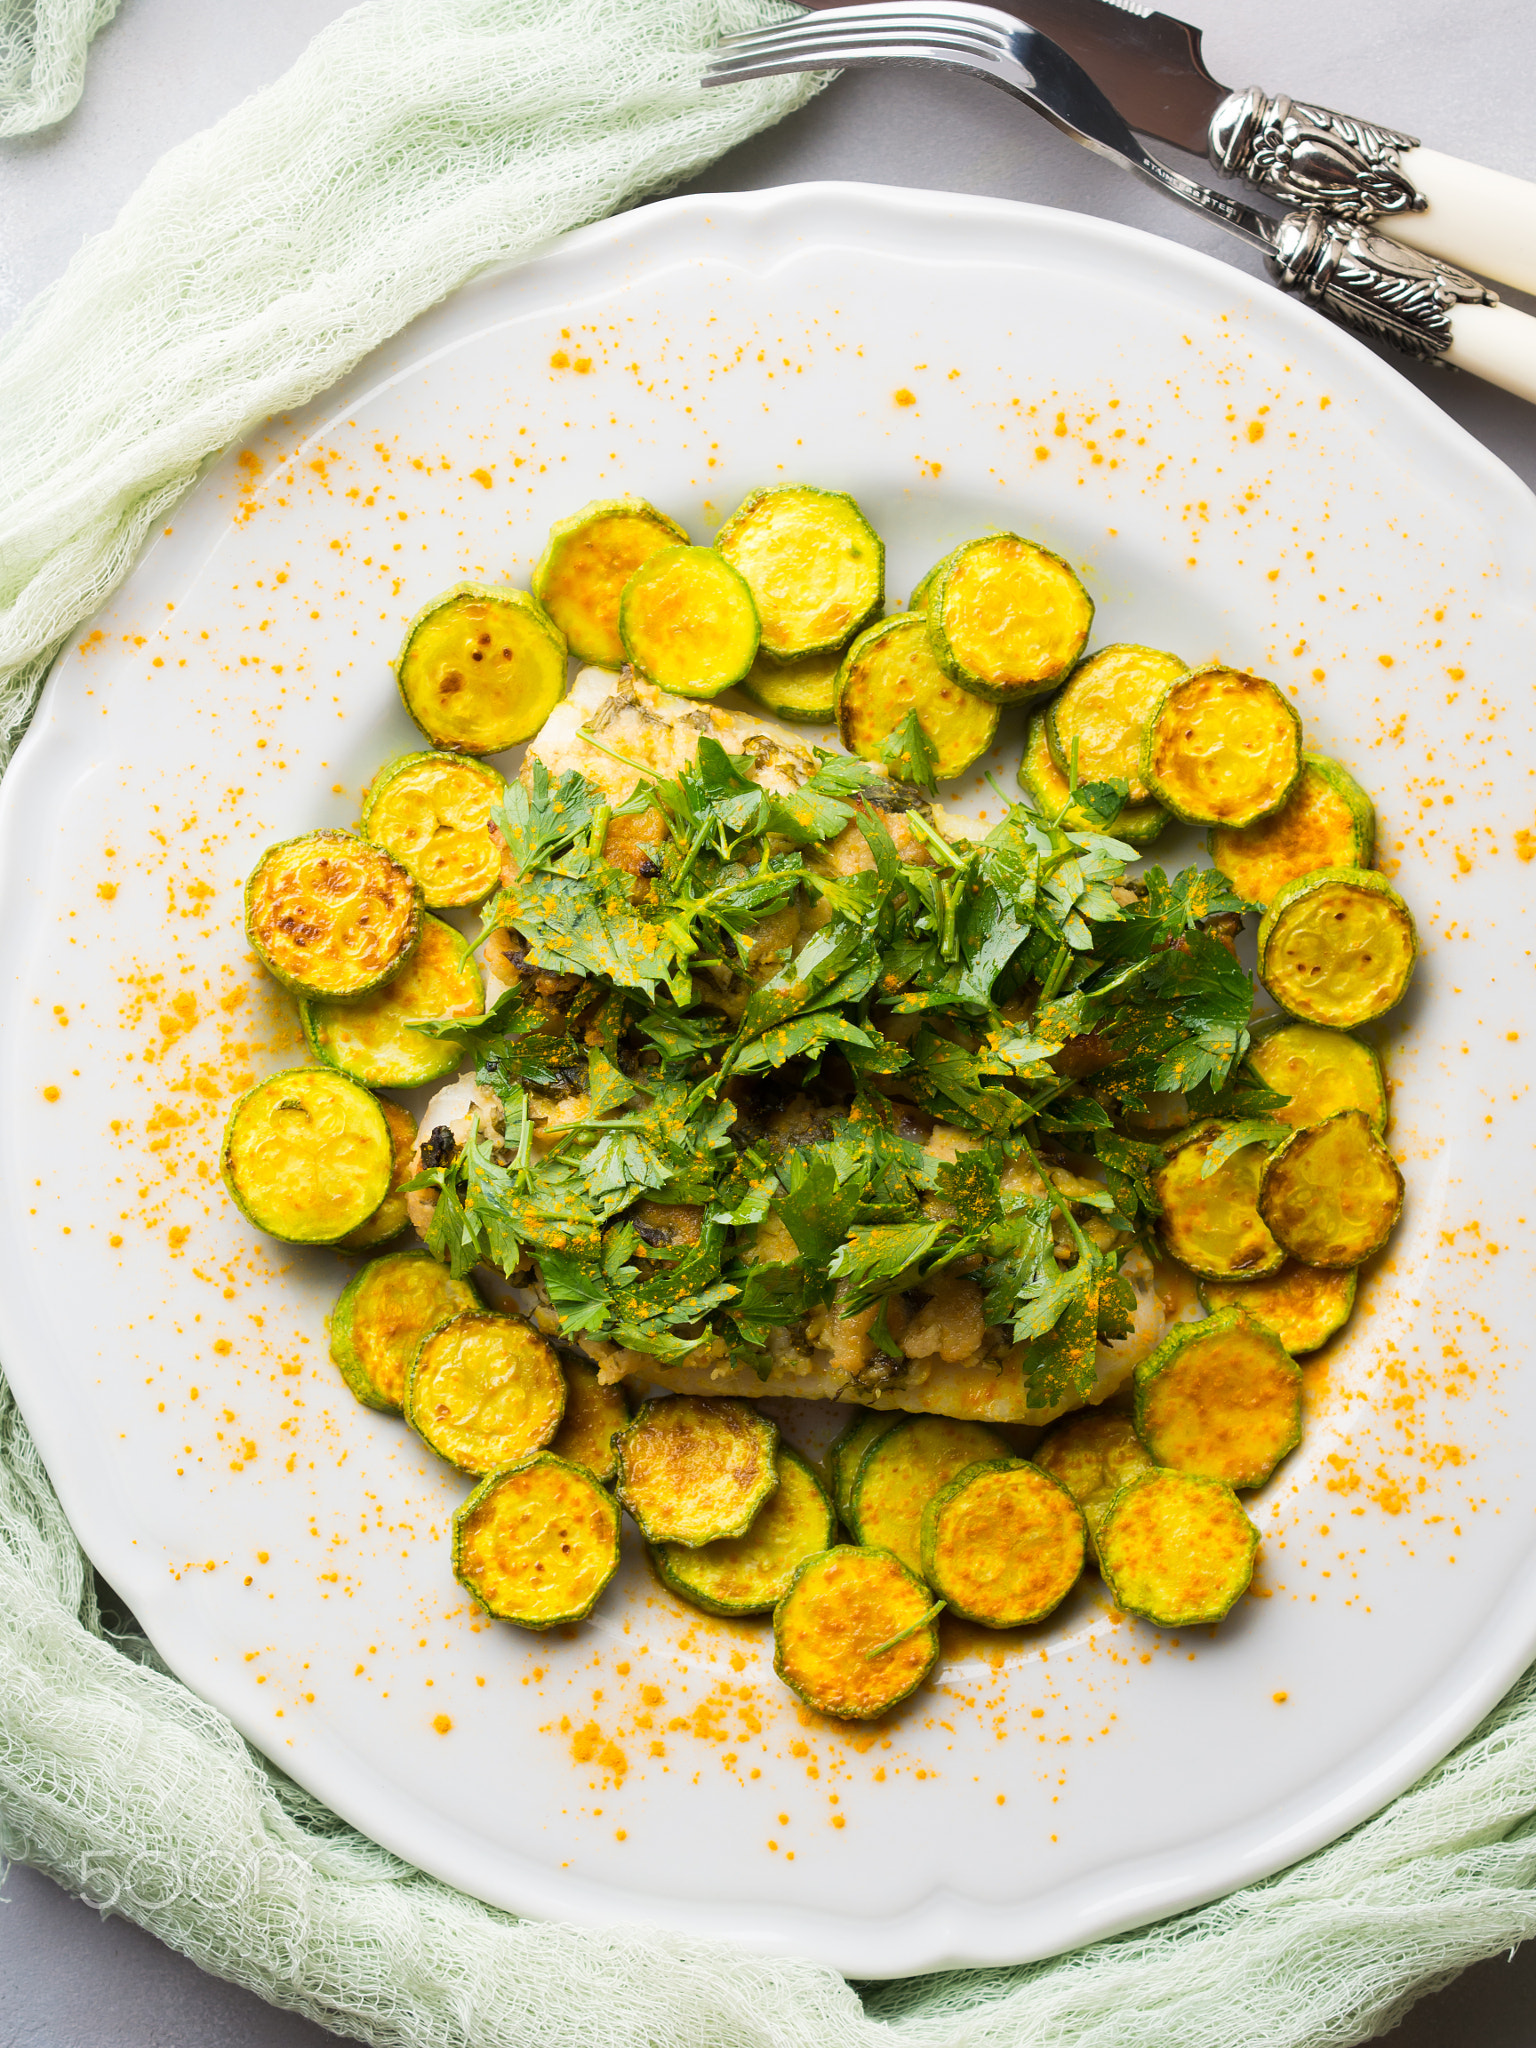 Stock fish fillet with turmeric courgettes